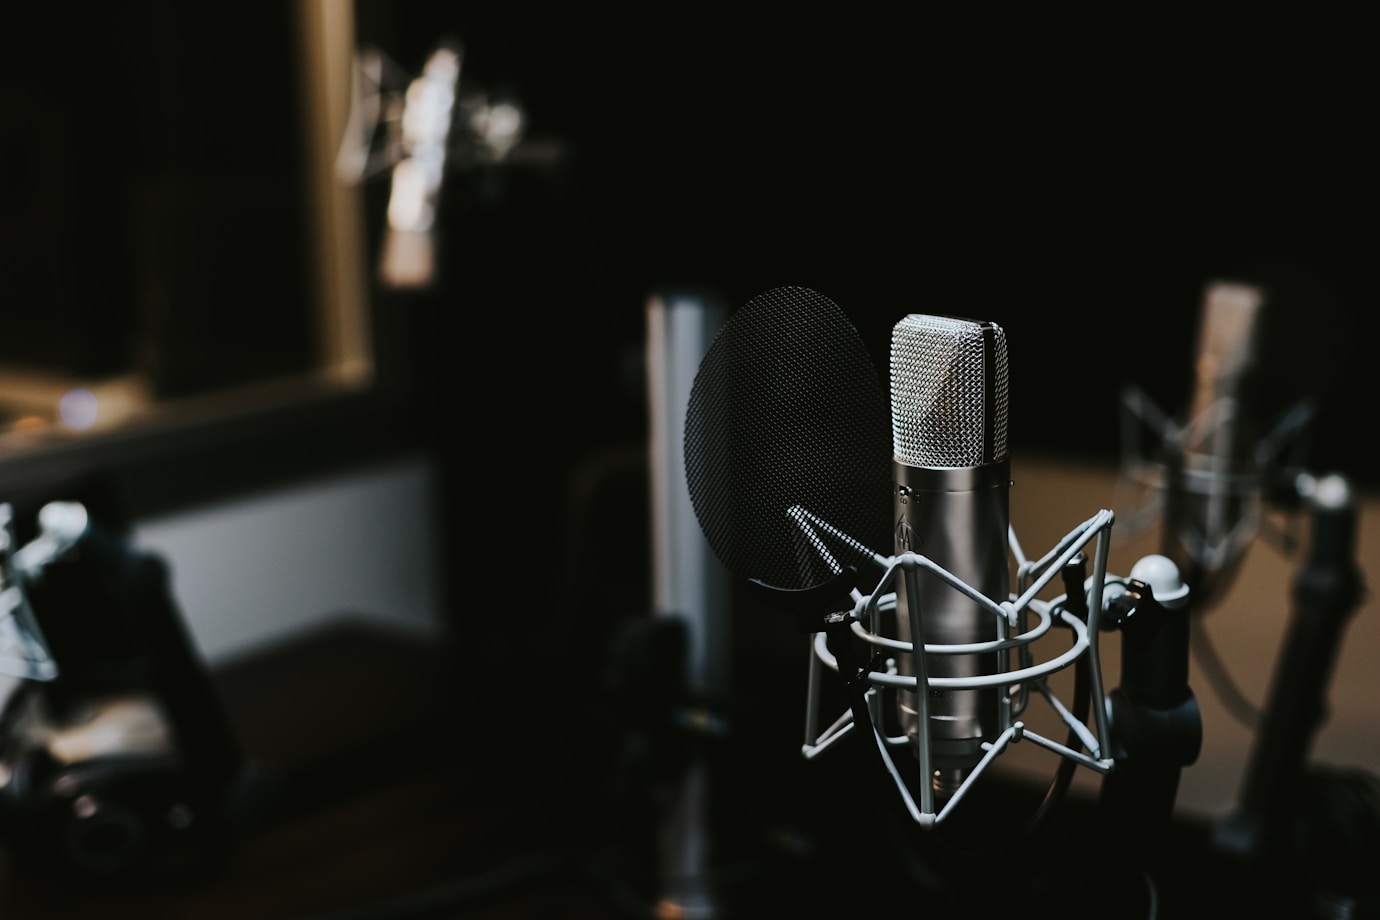 "Professional podcast microphone with a pop filter, set against a backdrop featuring the logo for the 'Warrior LDRSHIP' podcast, ready for broadcasting insightful leadership discussions."